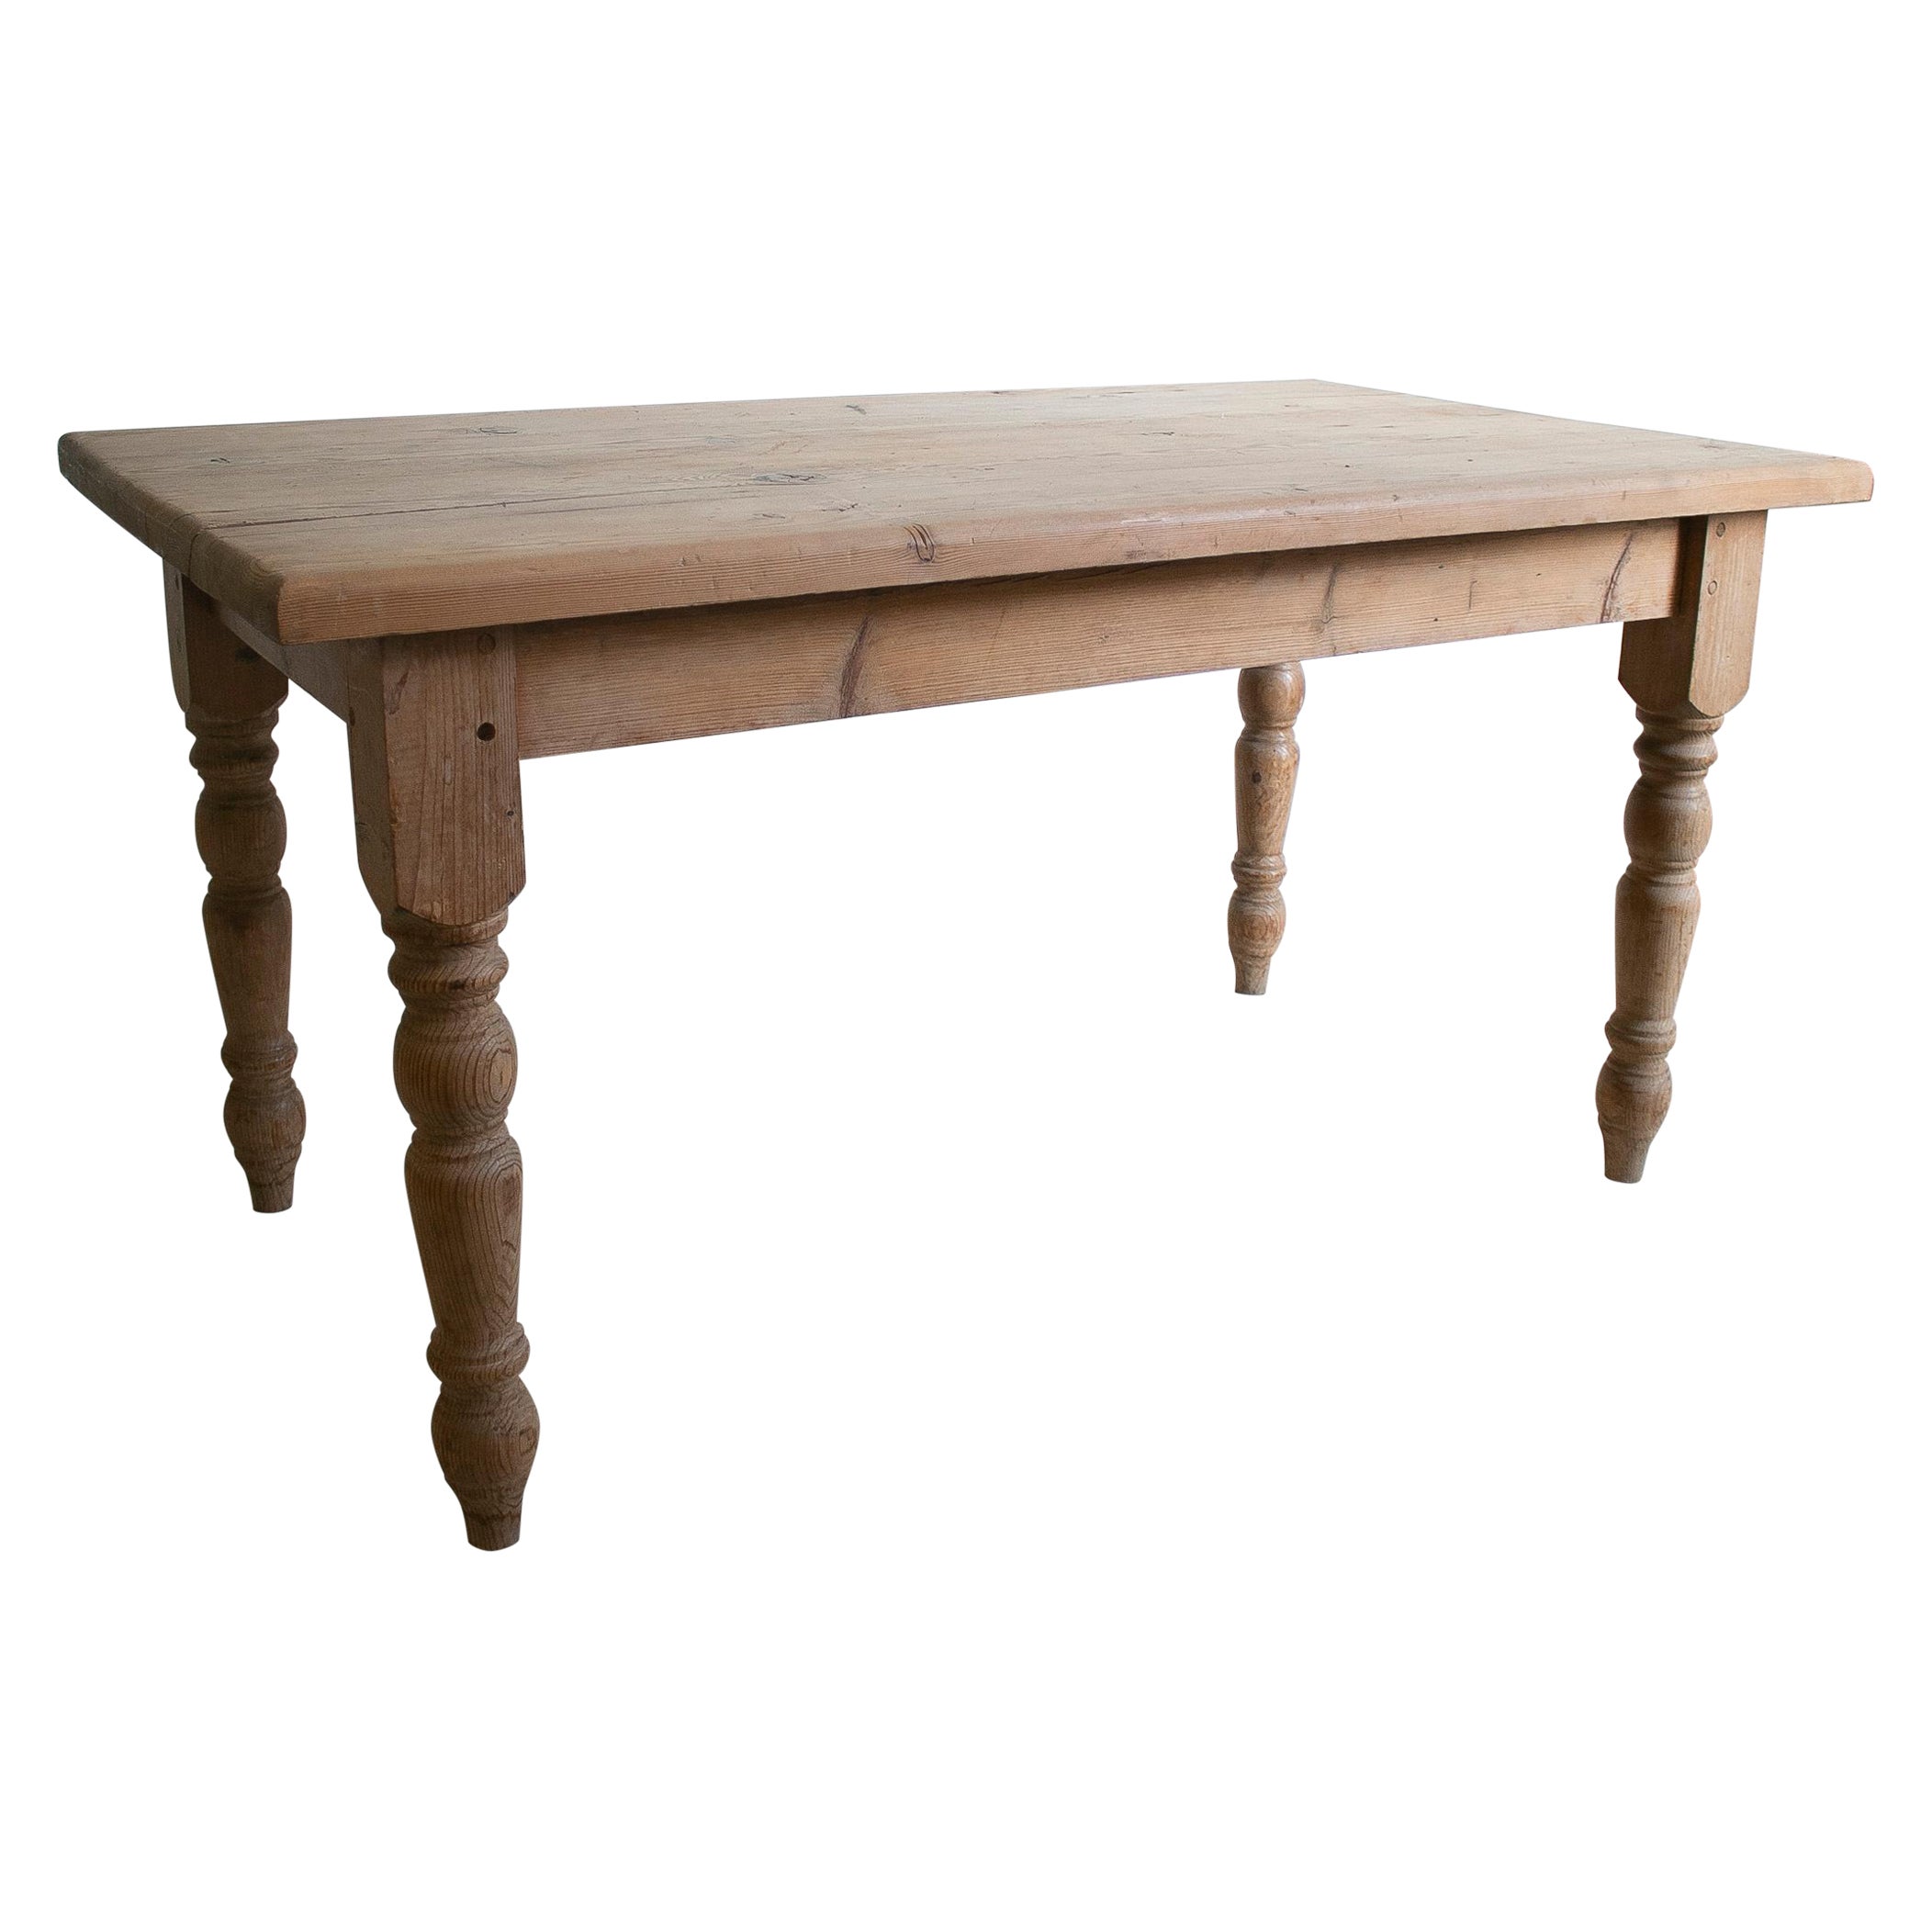 1930s Spanish Limewashed Pine Wood Farmhouse Table For Sale